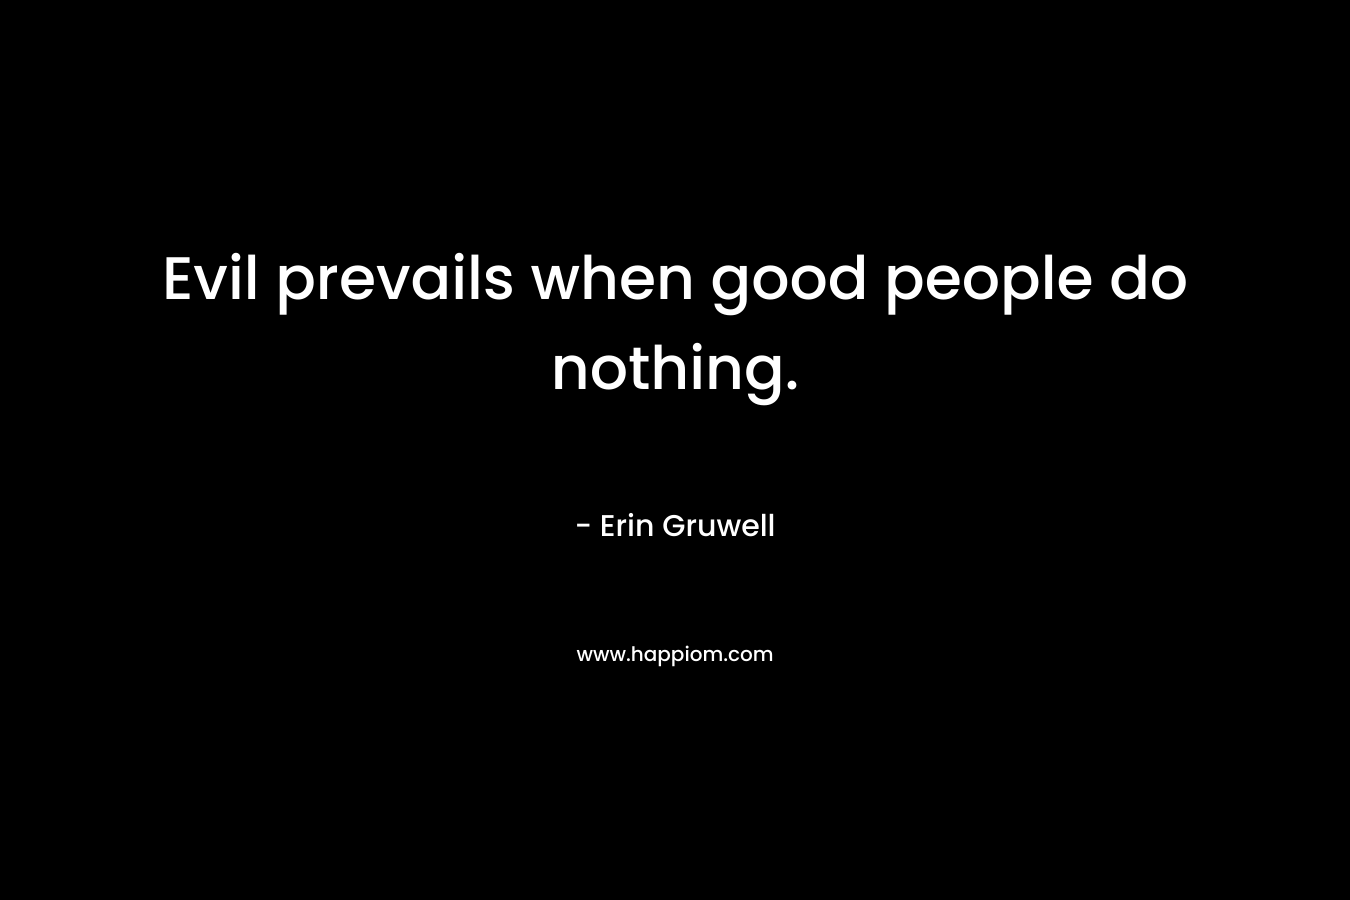 Evil prevails when good people do nothing. – Erin Gruwell